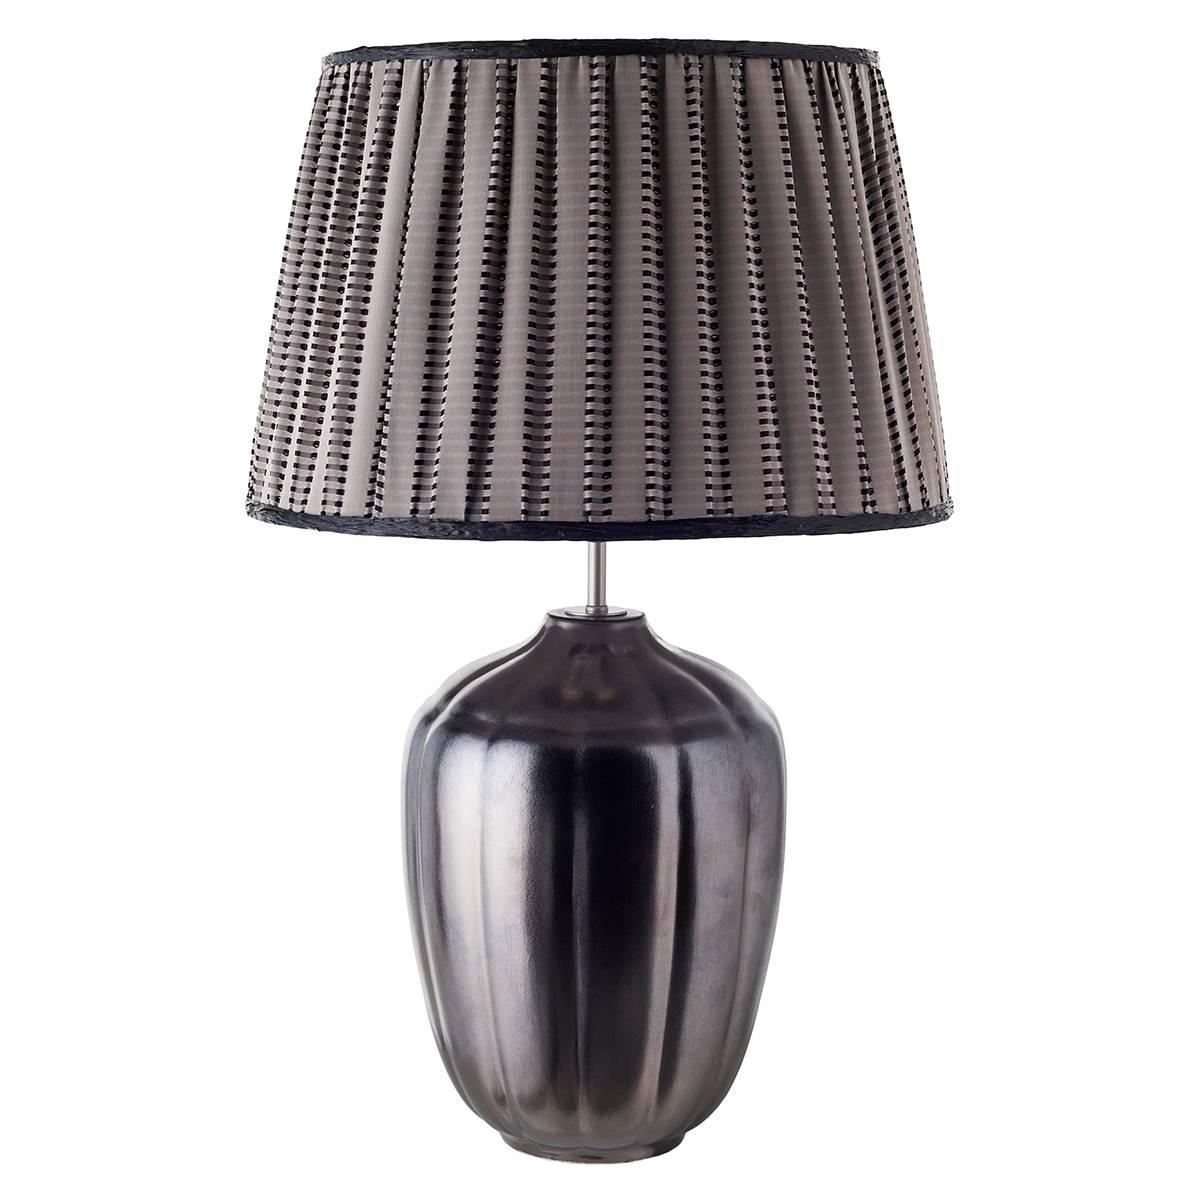 Pair of sinuous ceramic table lamps and shades.
The sinuous and smooth shape of the lamps is emphasized by the satin metallic glaze. The lamps are complemented by cylindrical shades in a grey woven fabric. Wired to your request, one E27/E26 screw